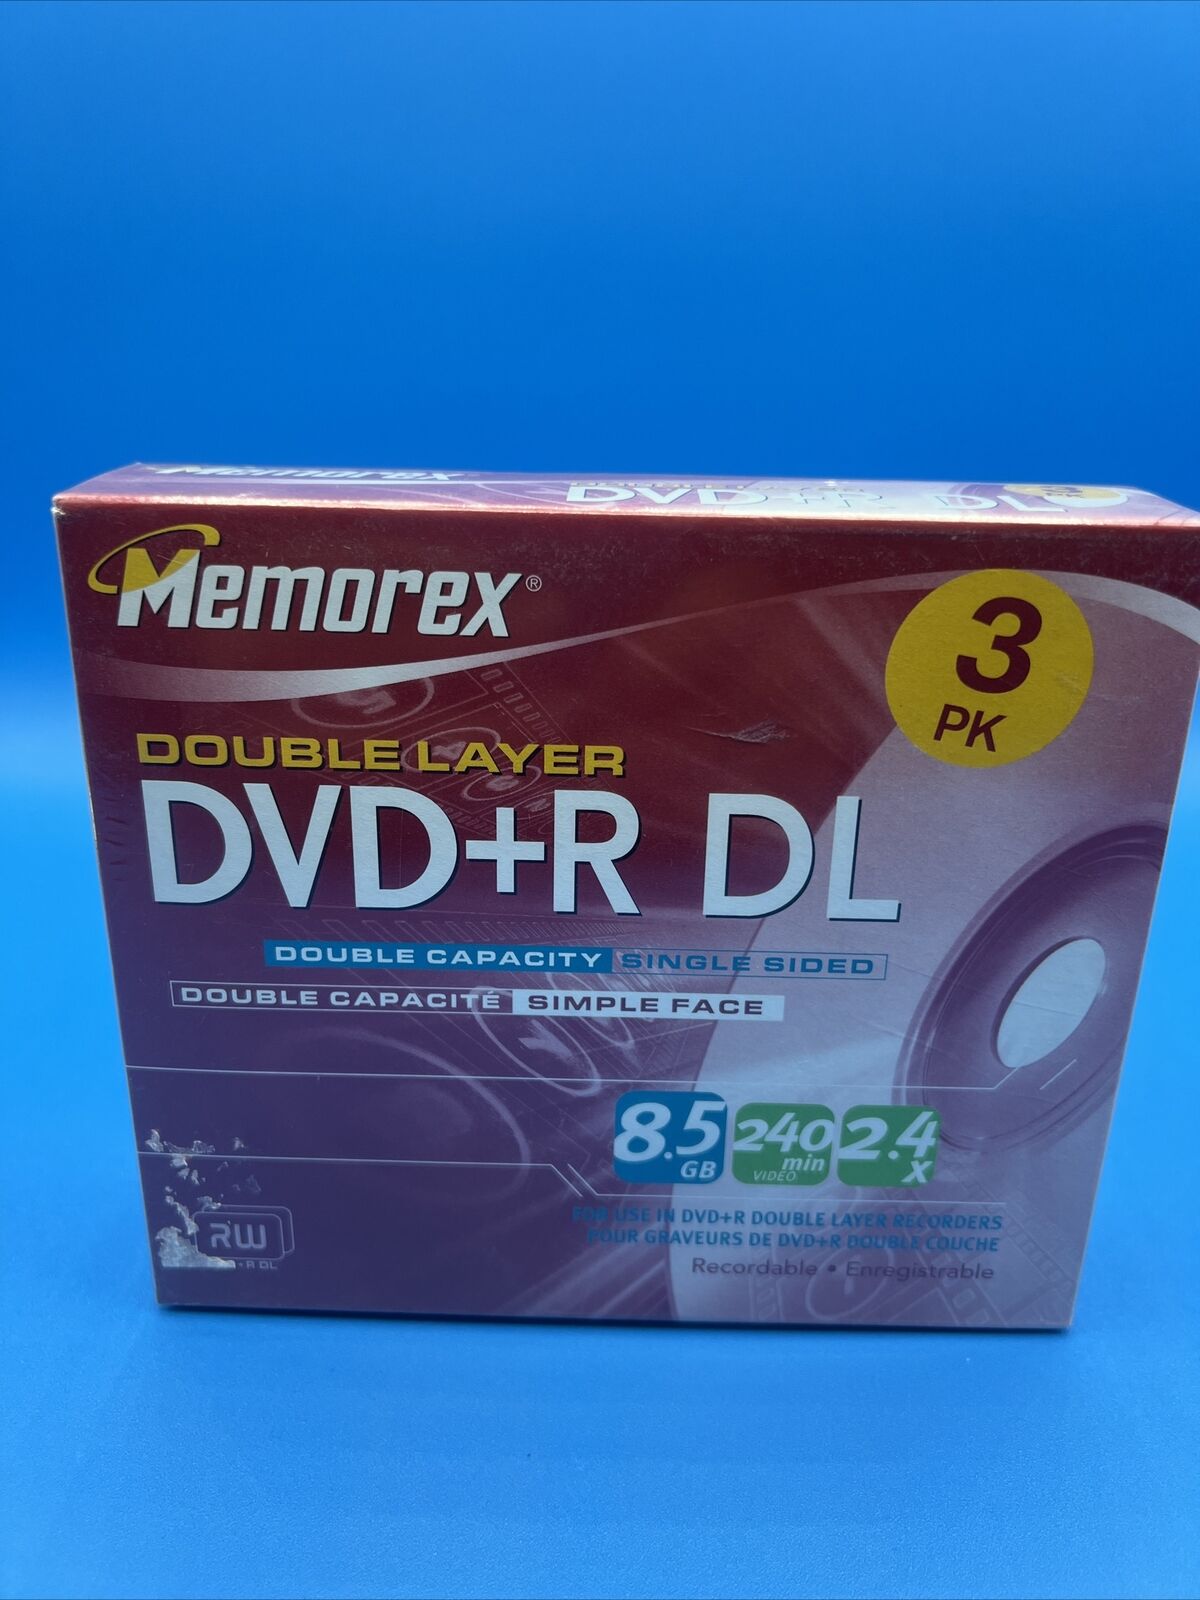 3 Pack - Memorex 2.4x 8.5 GB Double Layer DVD+R DL Sealed